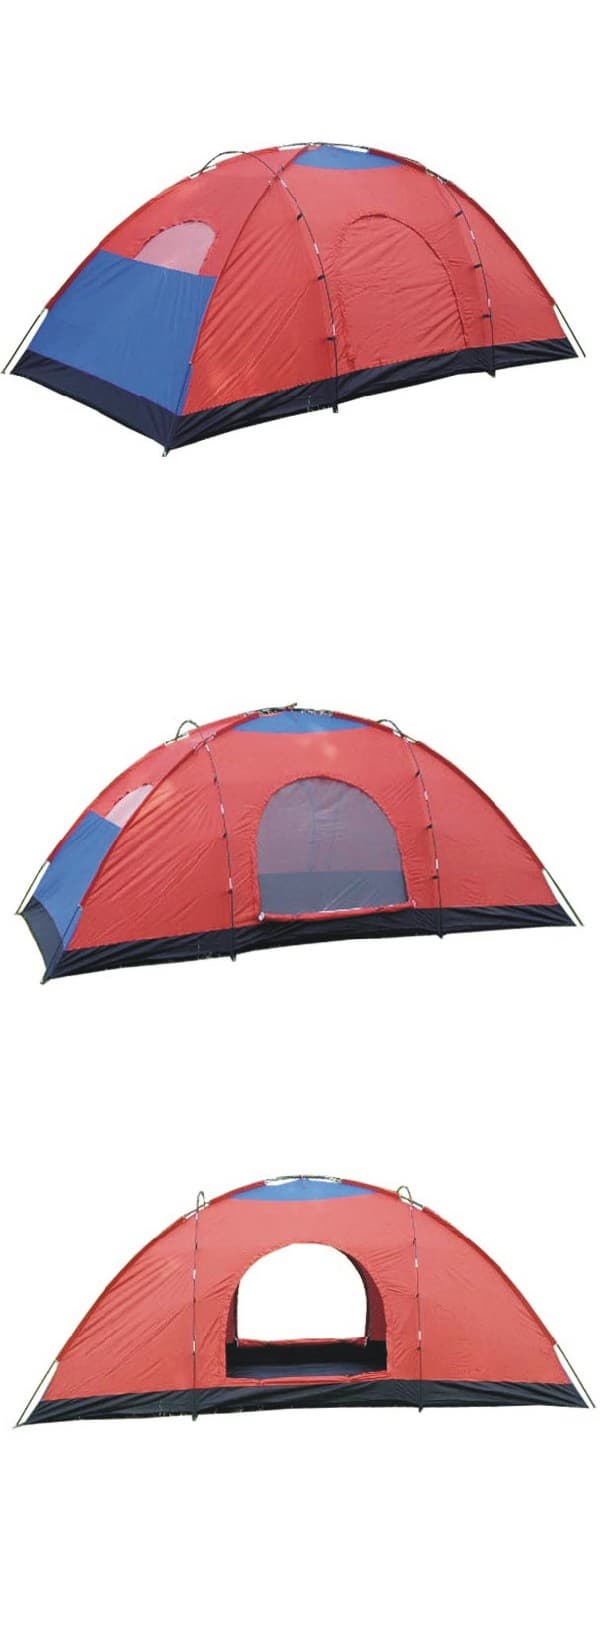 NEW 2010/11 MODEL WITH HEAT SEALED SEAMS 5 PERSONS CAMPING TENT